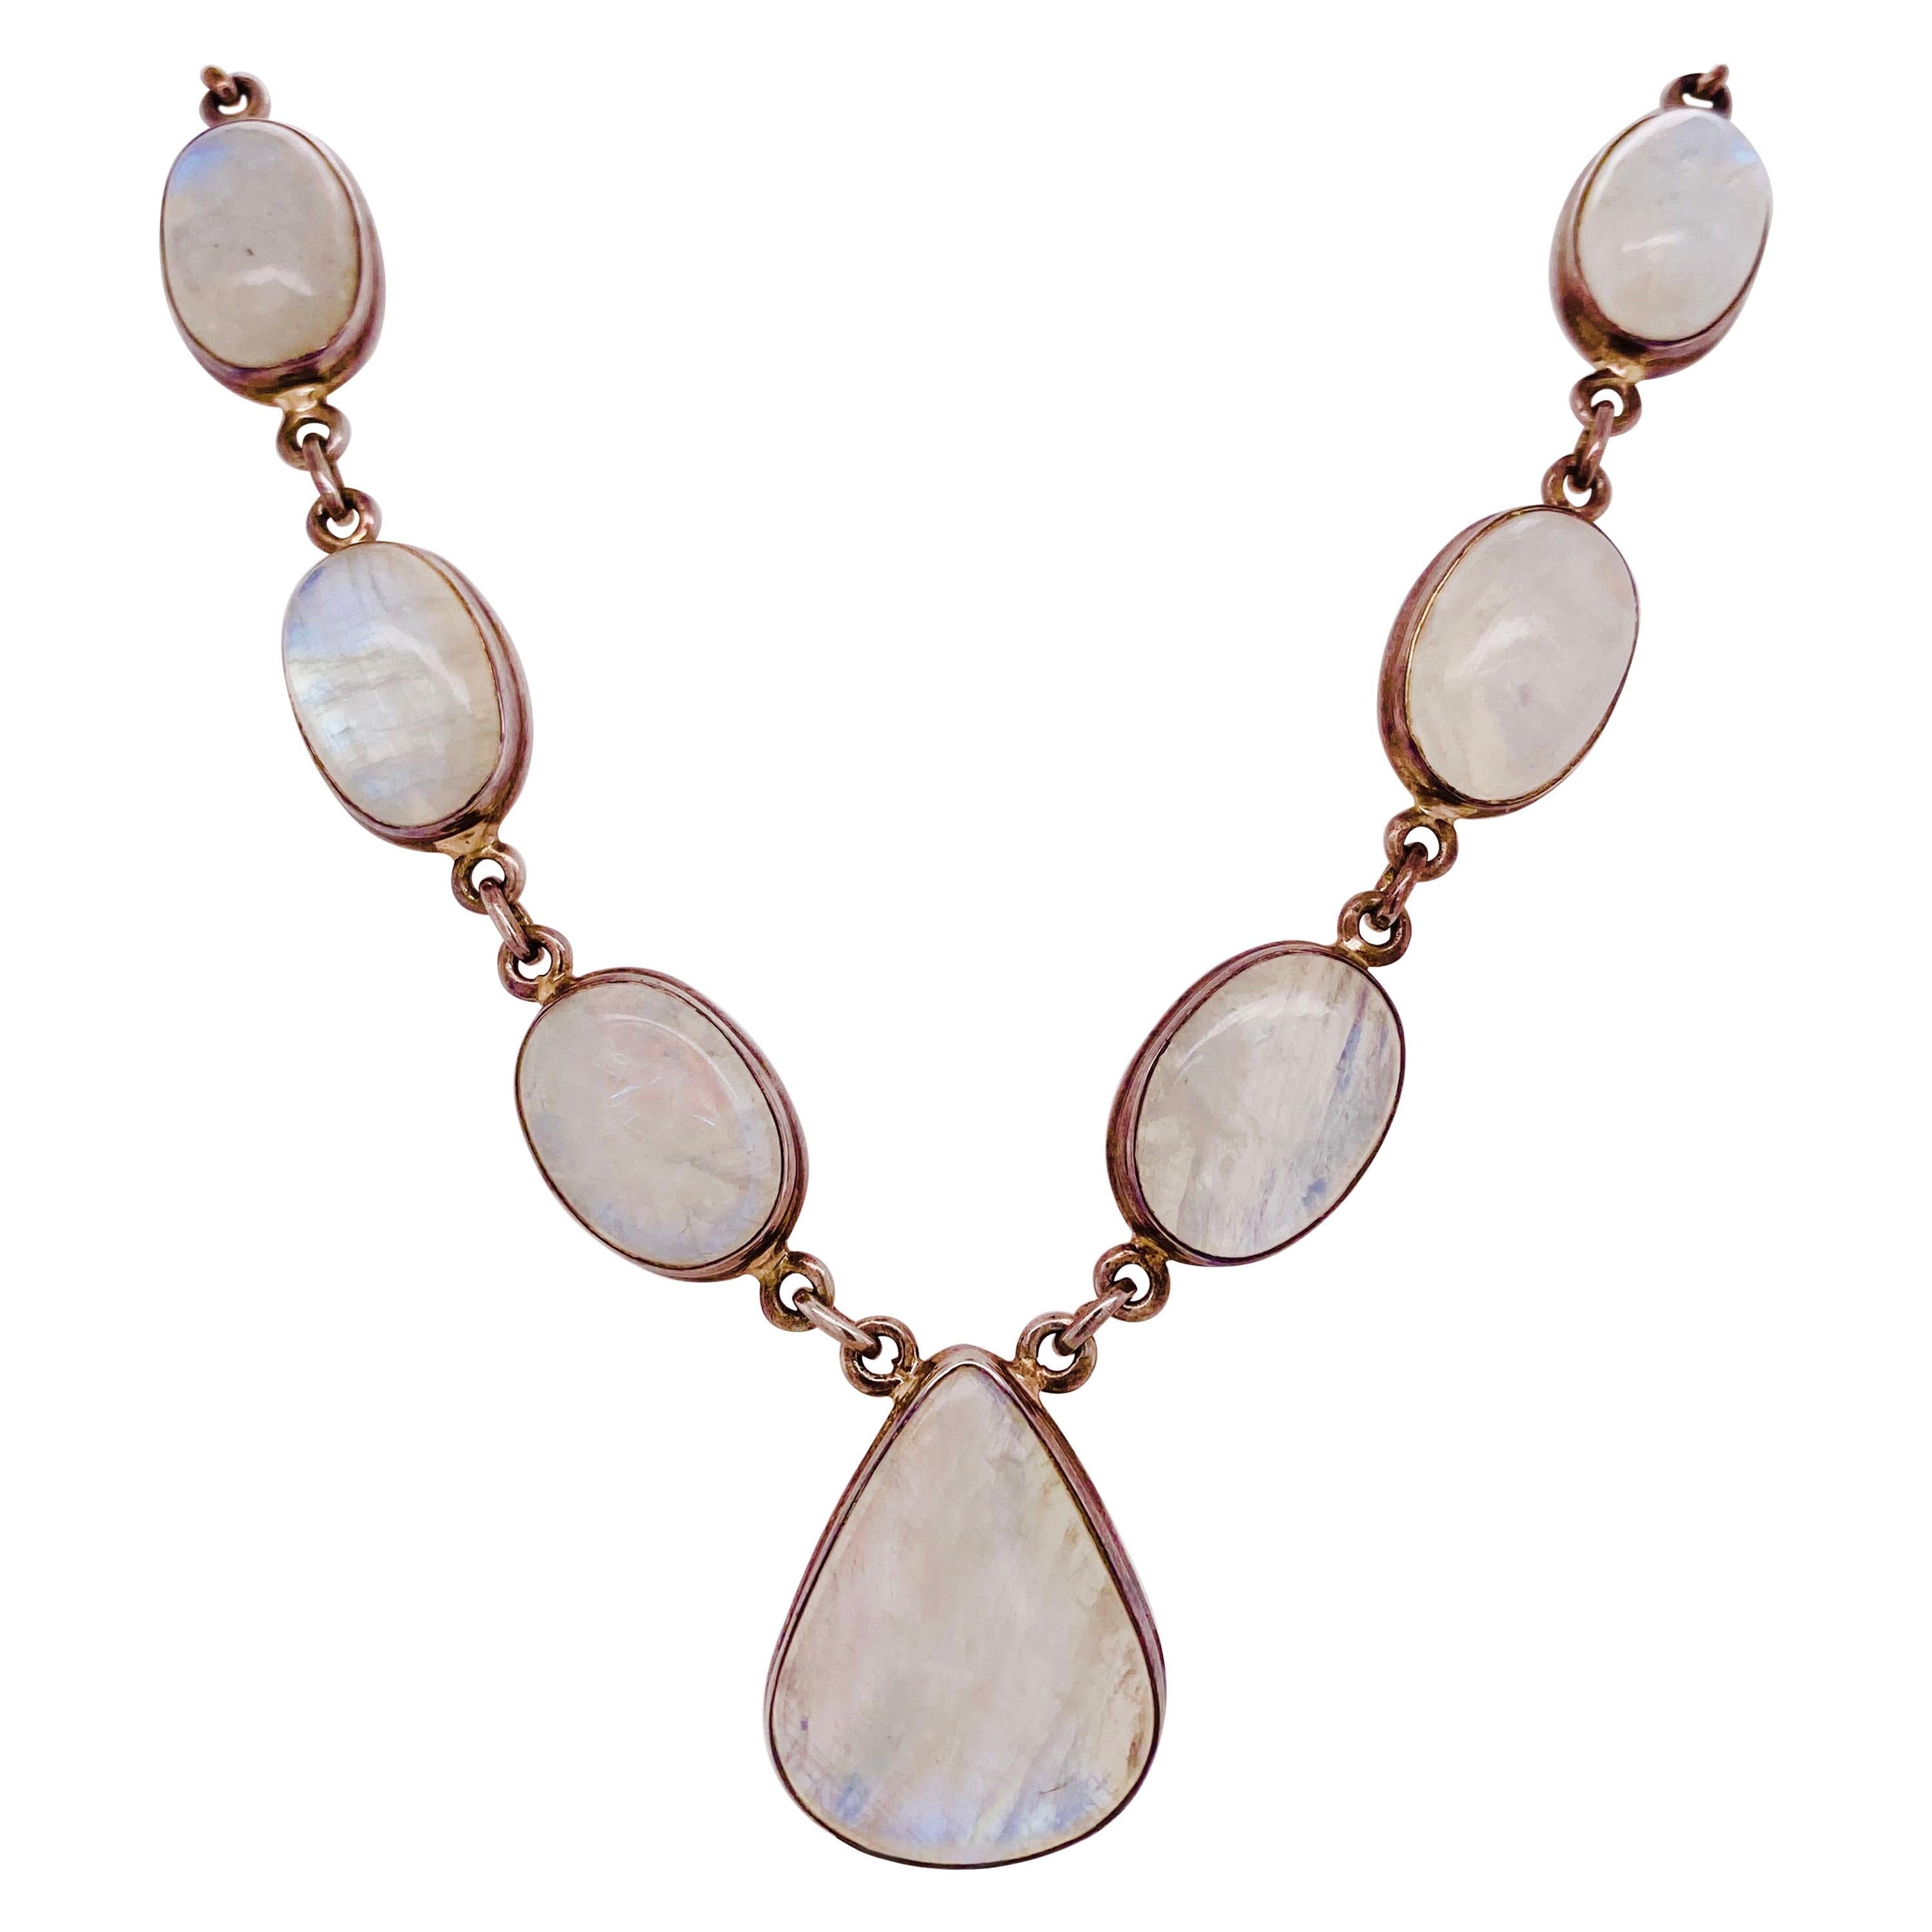 Silver Moonstone Necklace Rainbow Moonstone Pendant Chain Necklace 925